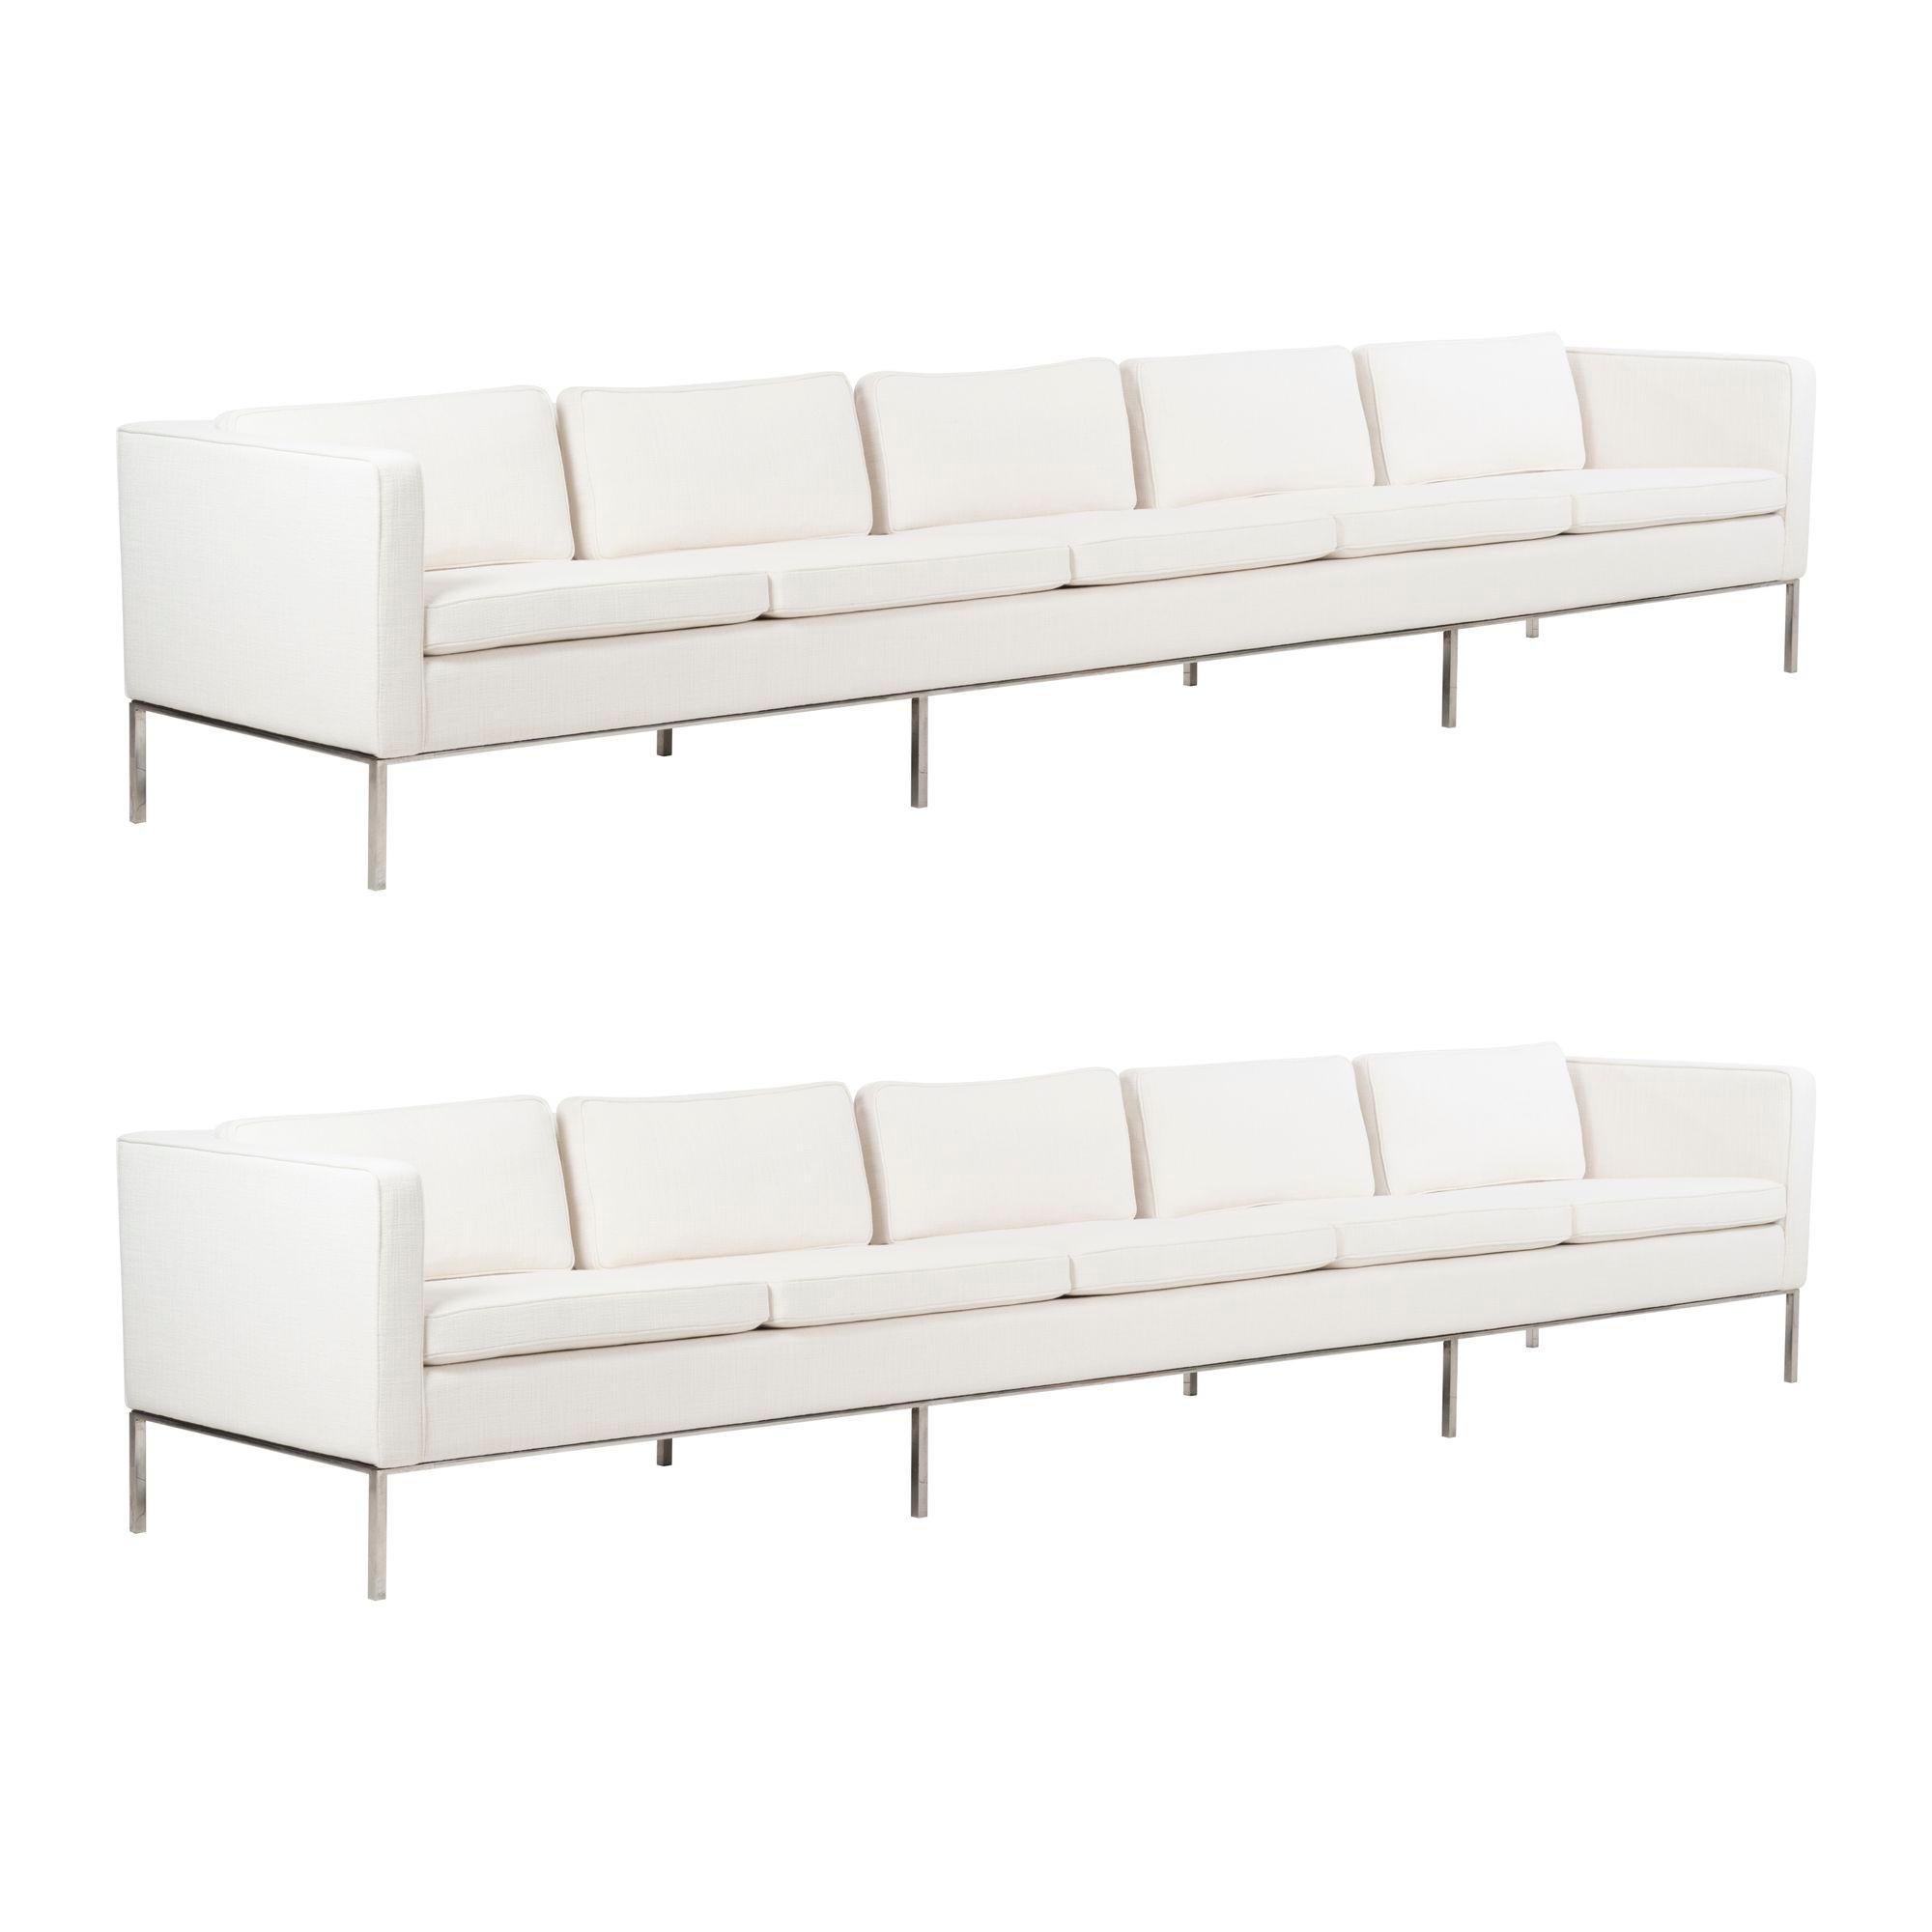 Pair of William Armbruster Monumental Five Seat Sofas in Chase Manhattan NYC For Sale 4